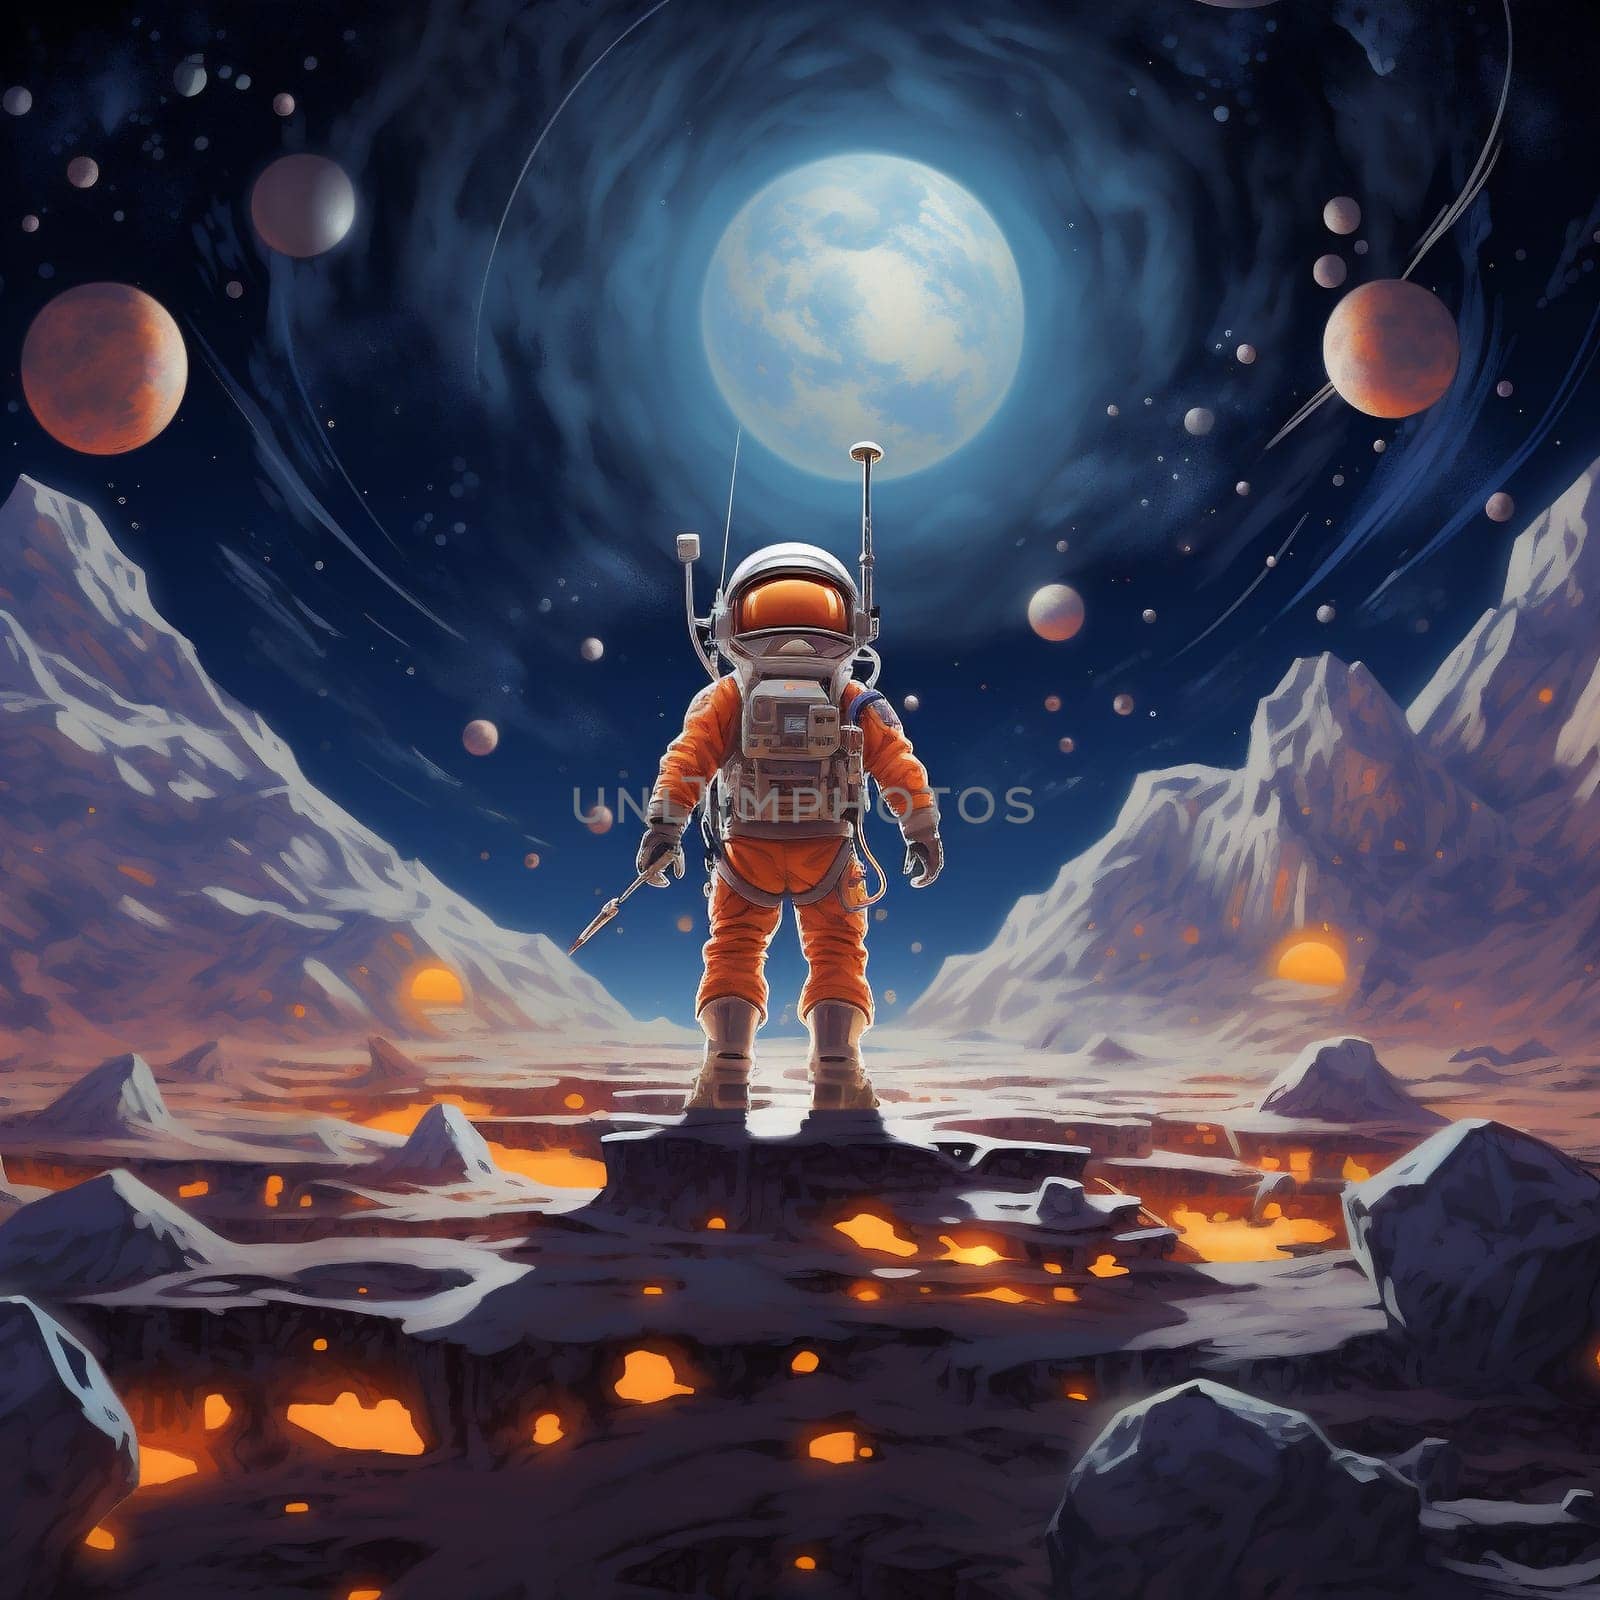 Astronaut in Space Suit Standing on an Unknown Planet Looking at the Galaxy. by Rina_Dozornaya